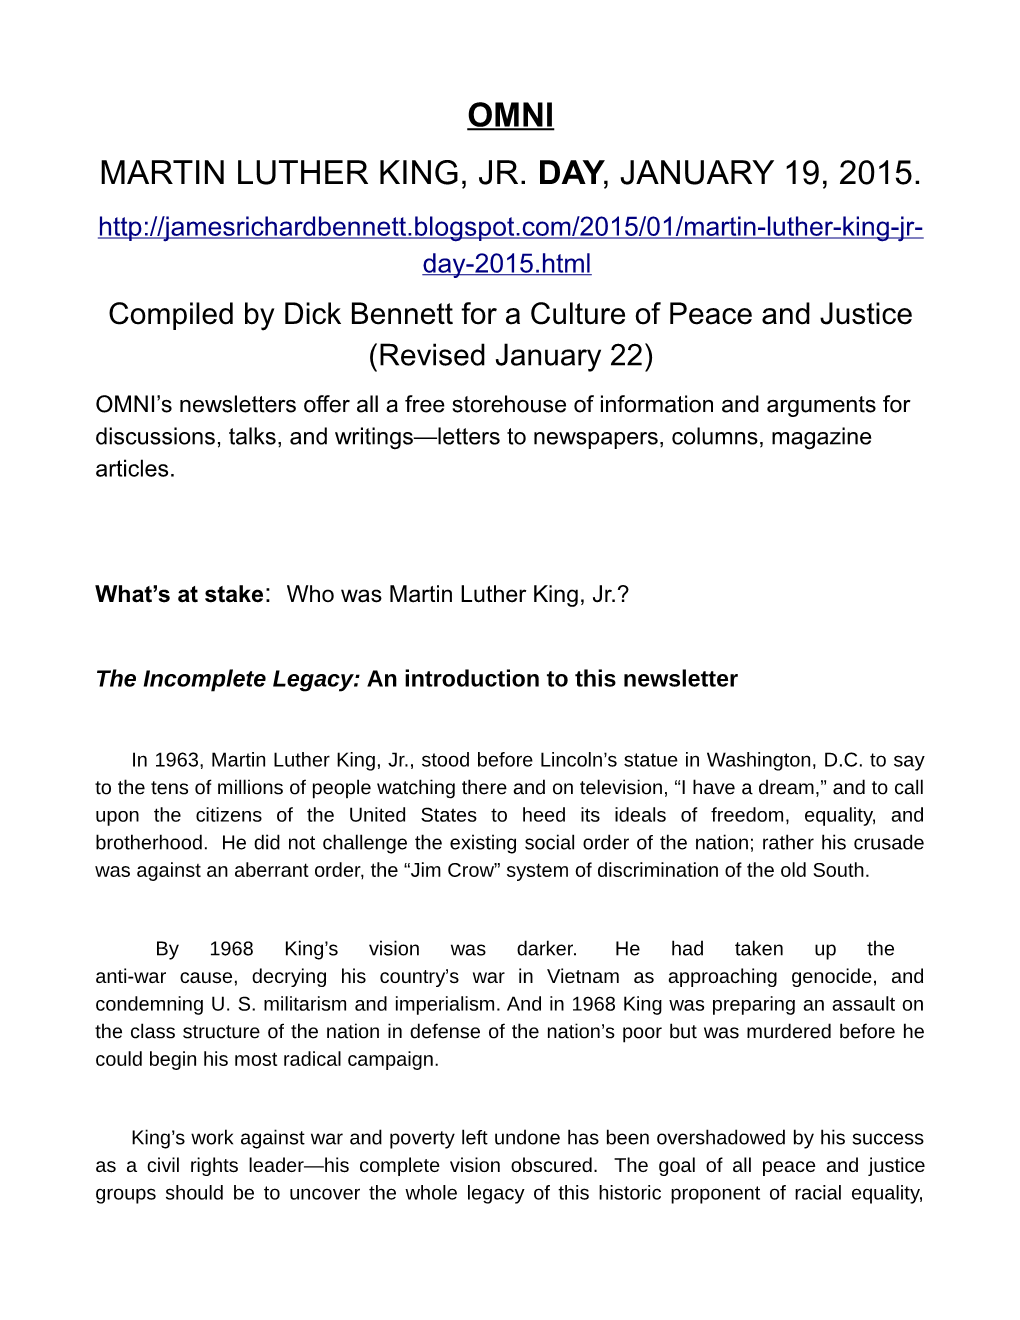 January 19 2015, Martin Luther King, Jr